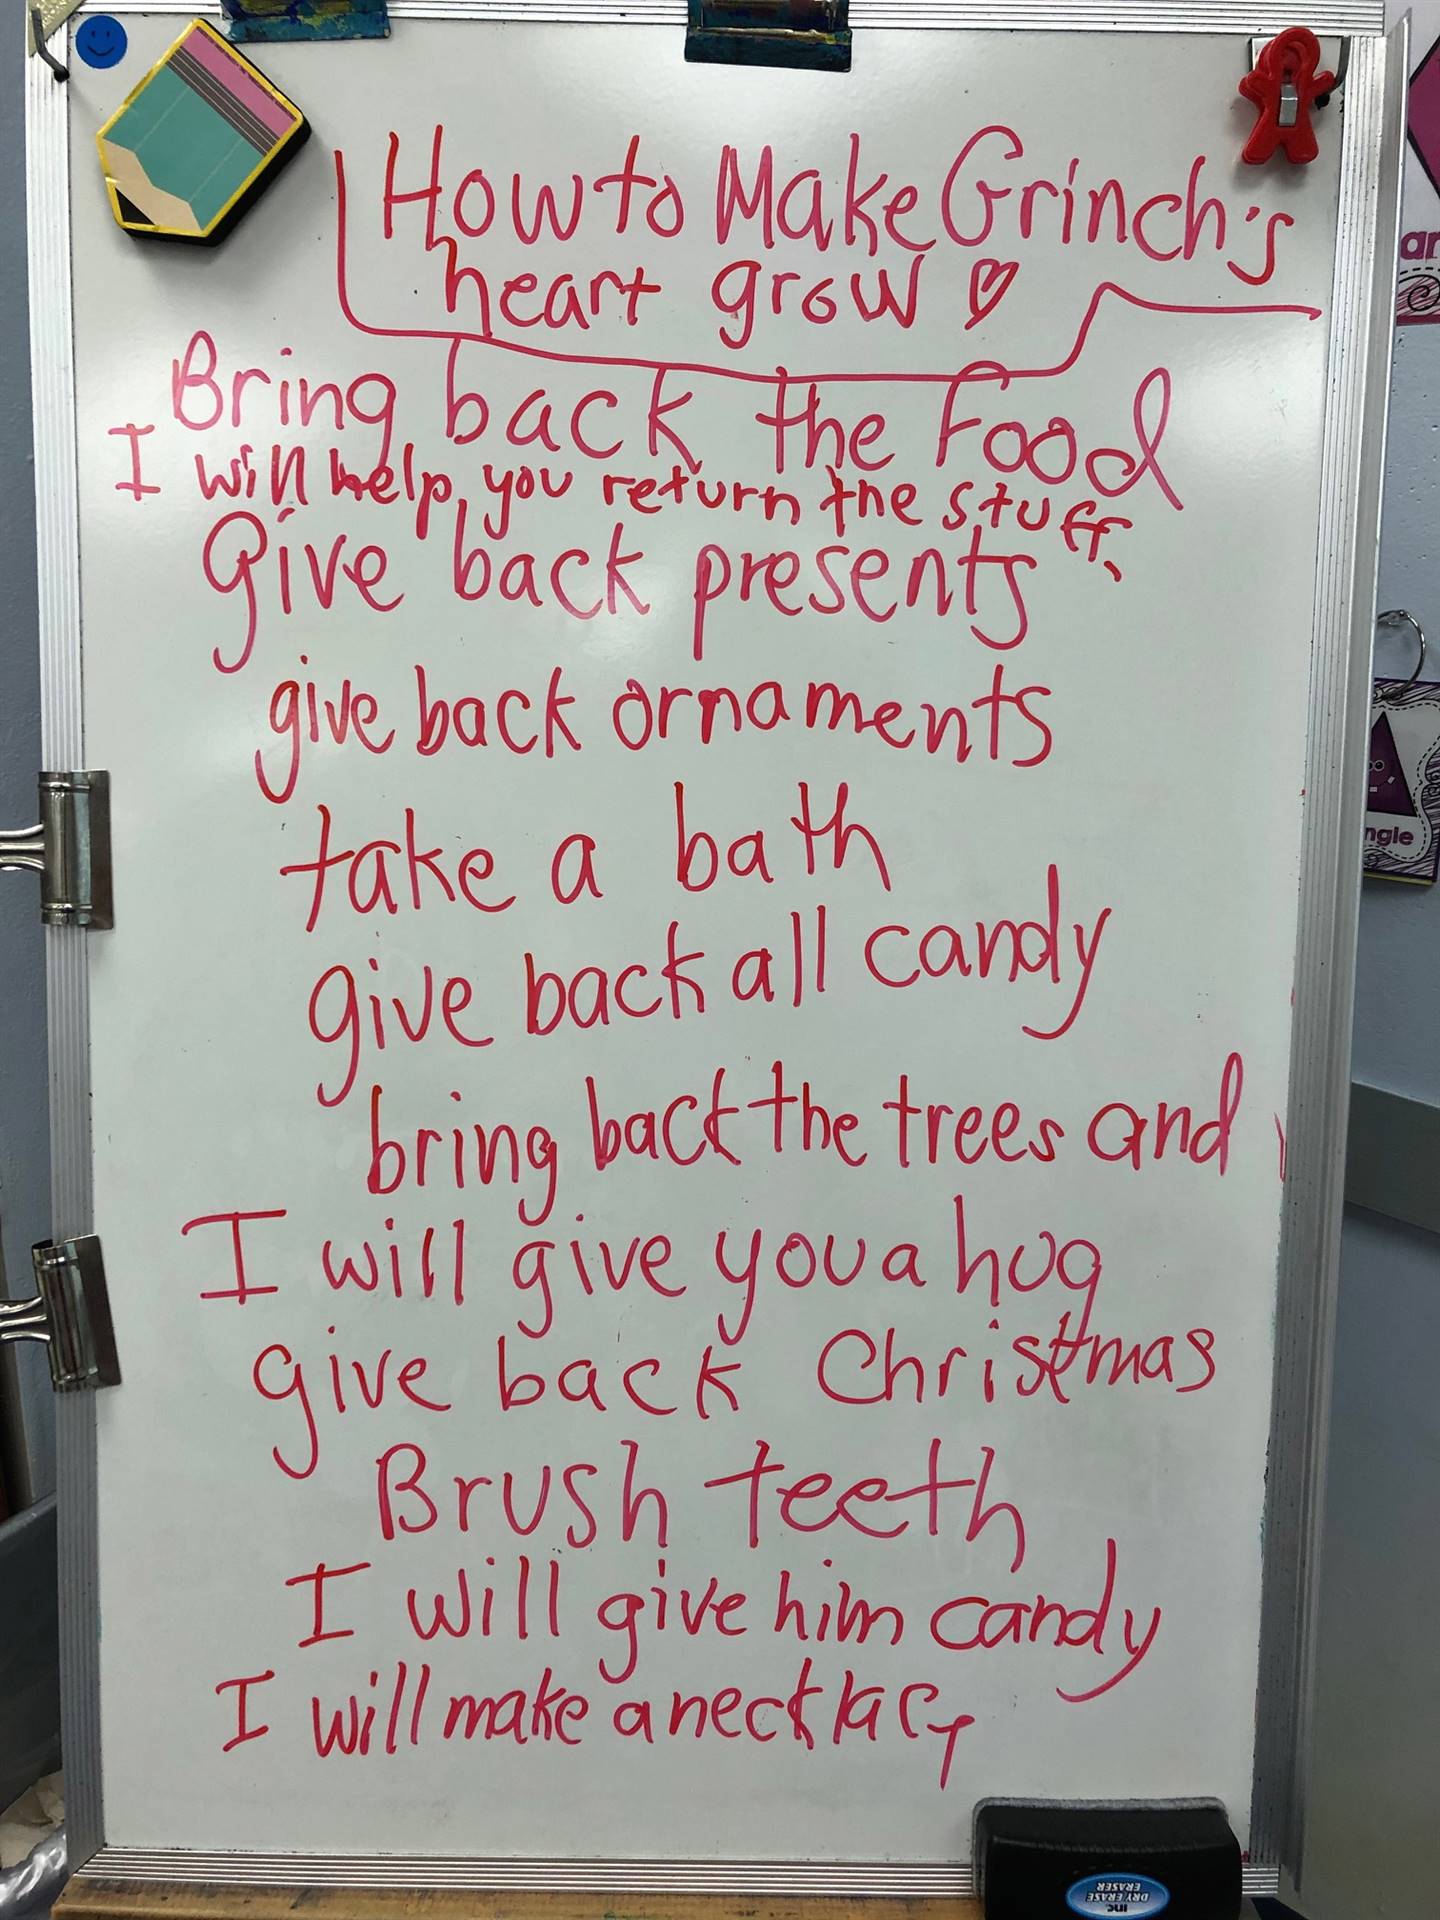 A paper with a list of ways to make the Grinch grin.